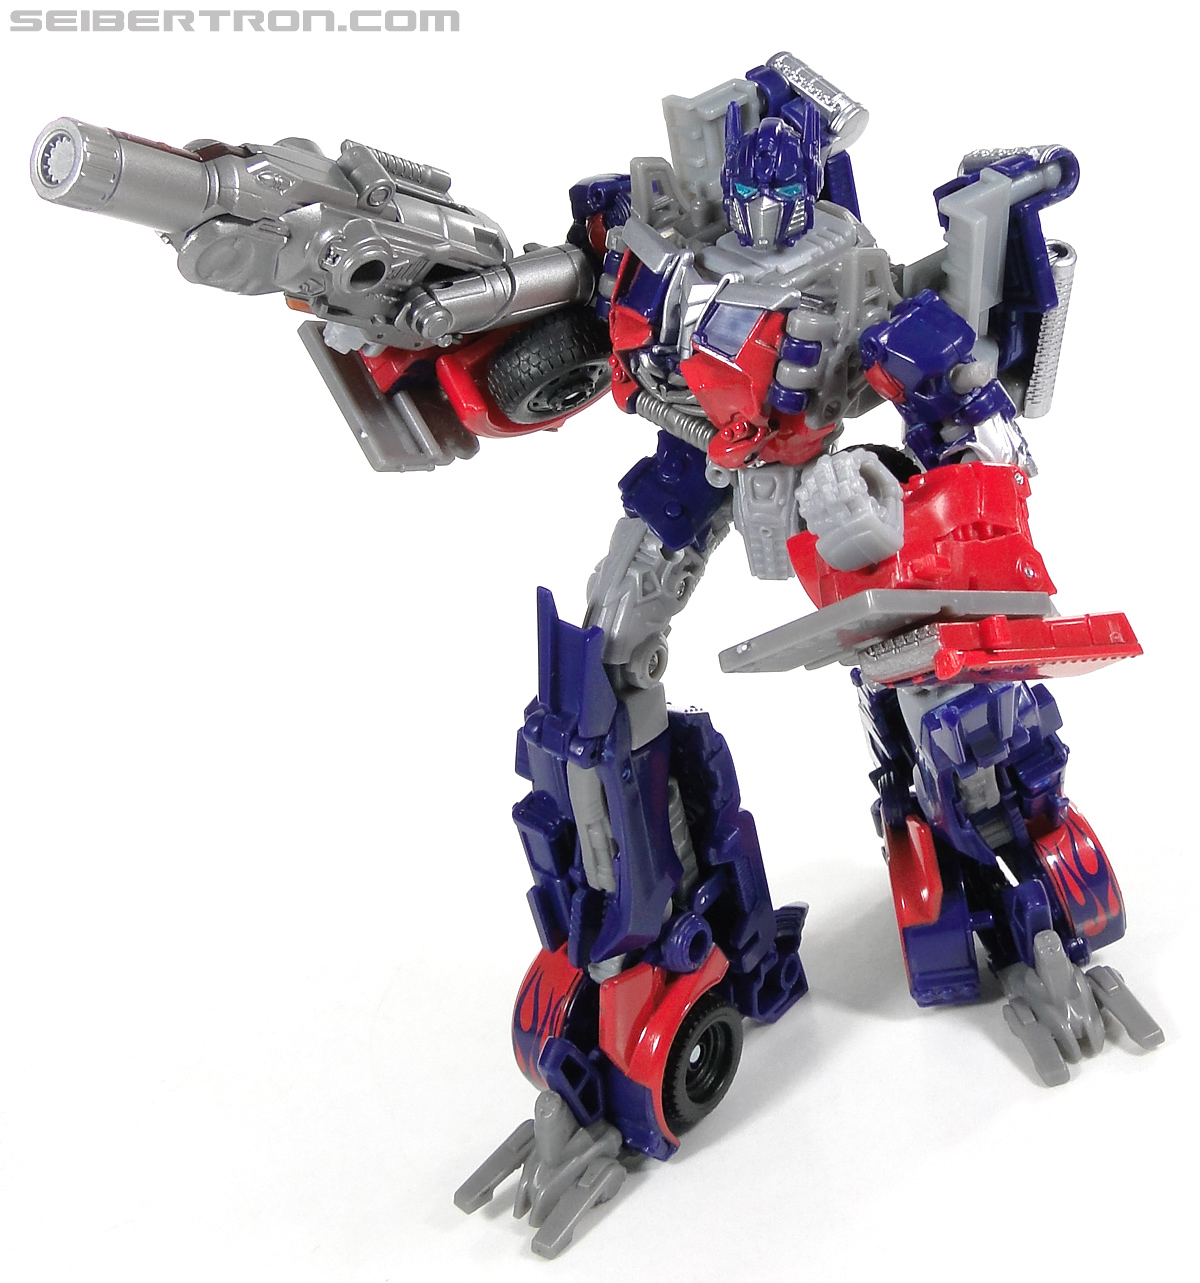 Transformers Dark of the Moon Optimus Prime with Mechtech Trailer (Image #177 of 248)